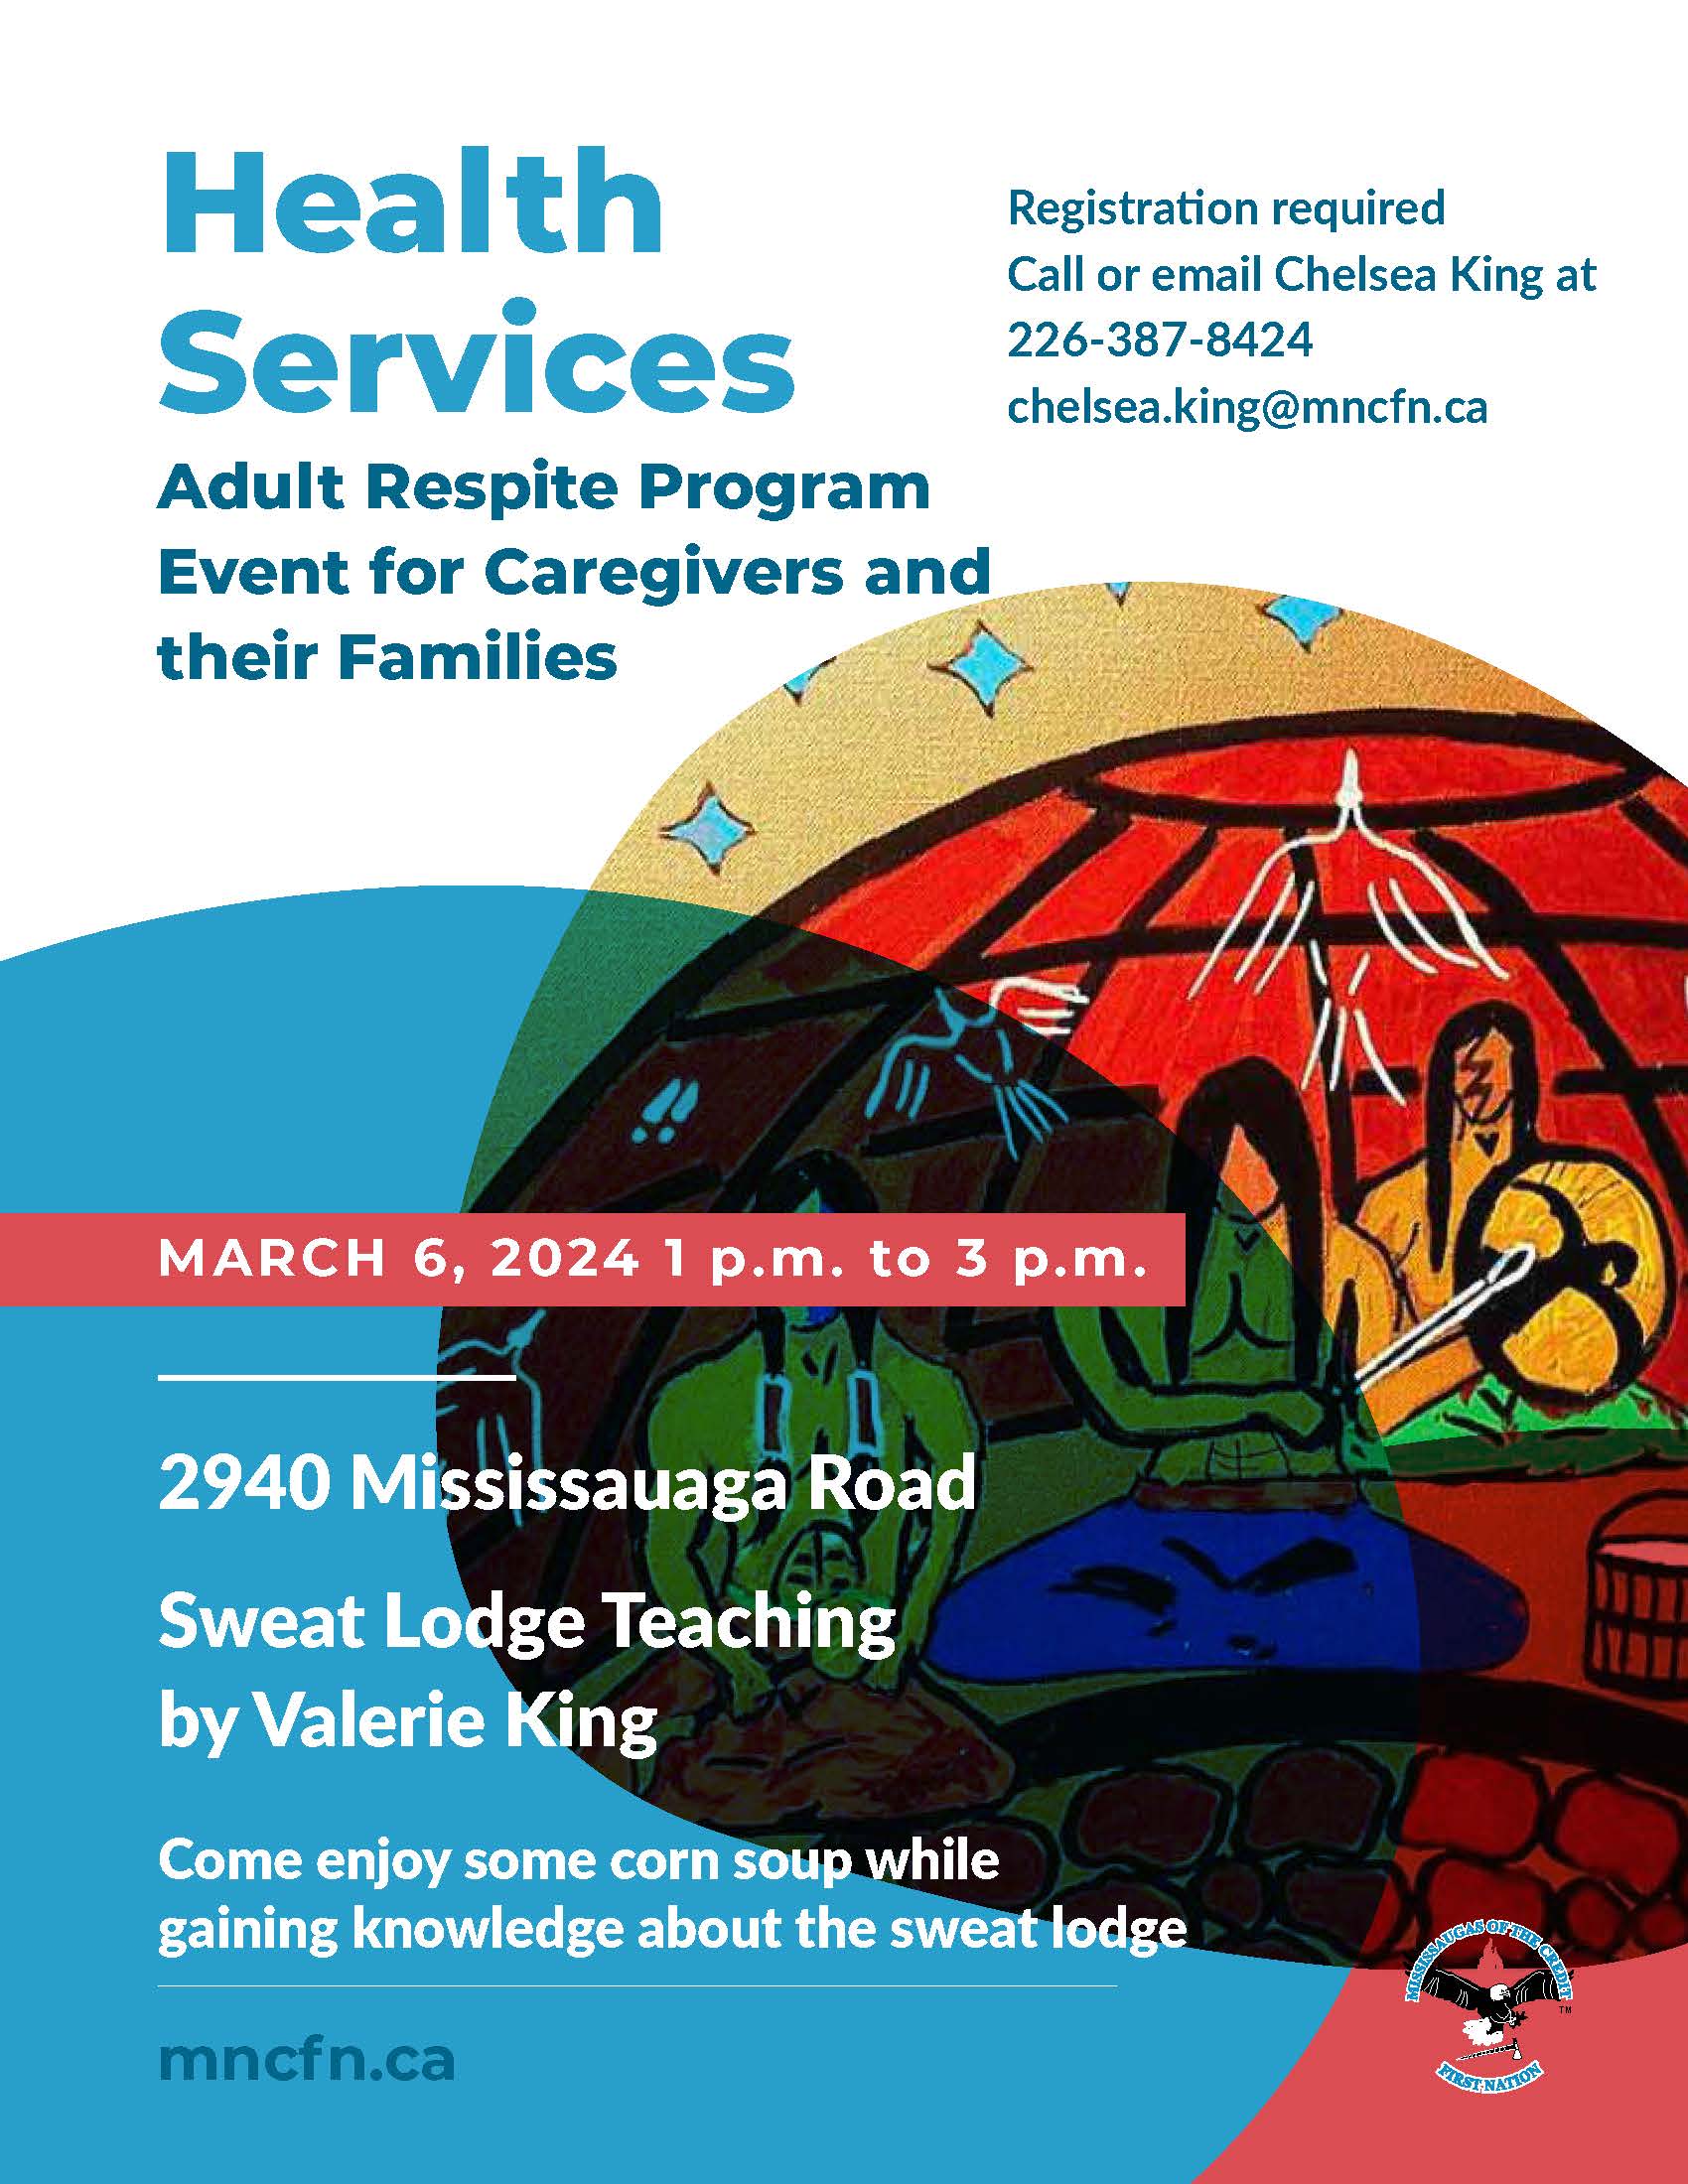 Health Services Adult Respite Program event for Caregivers and their Families